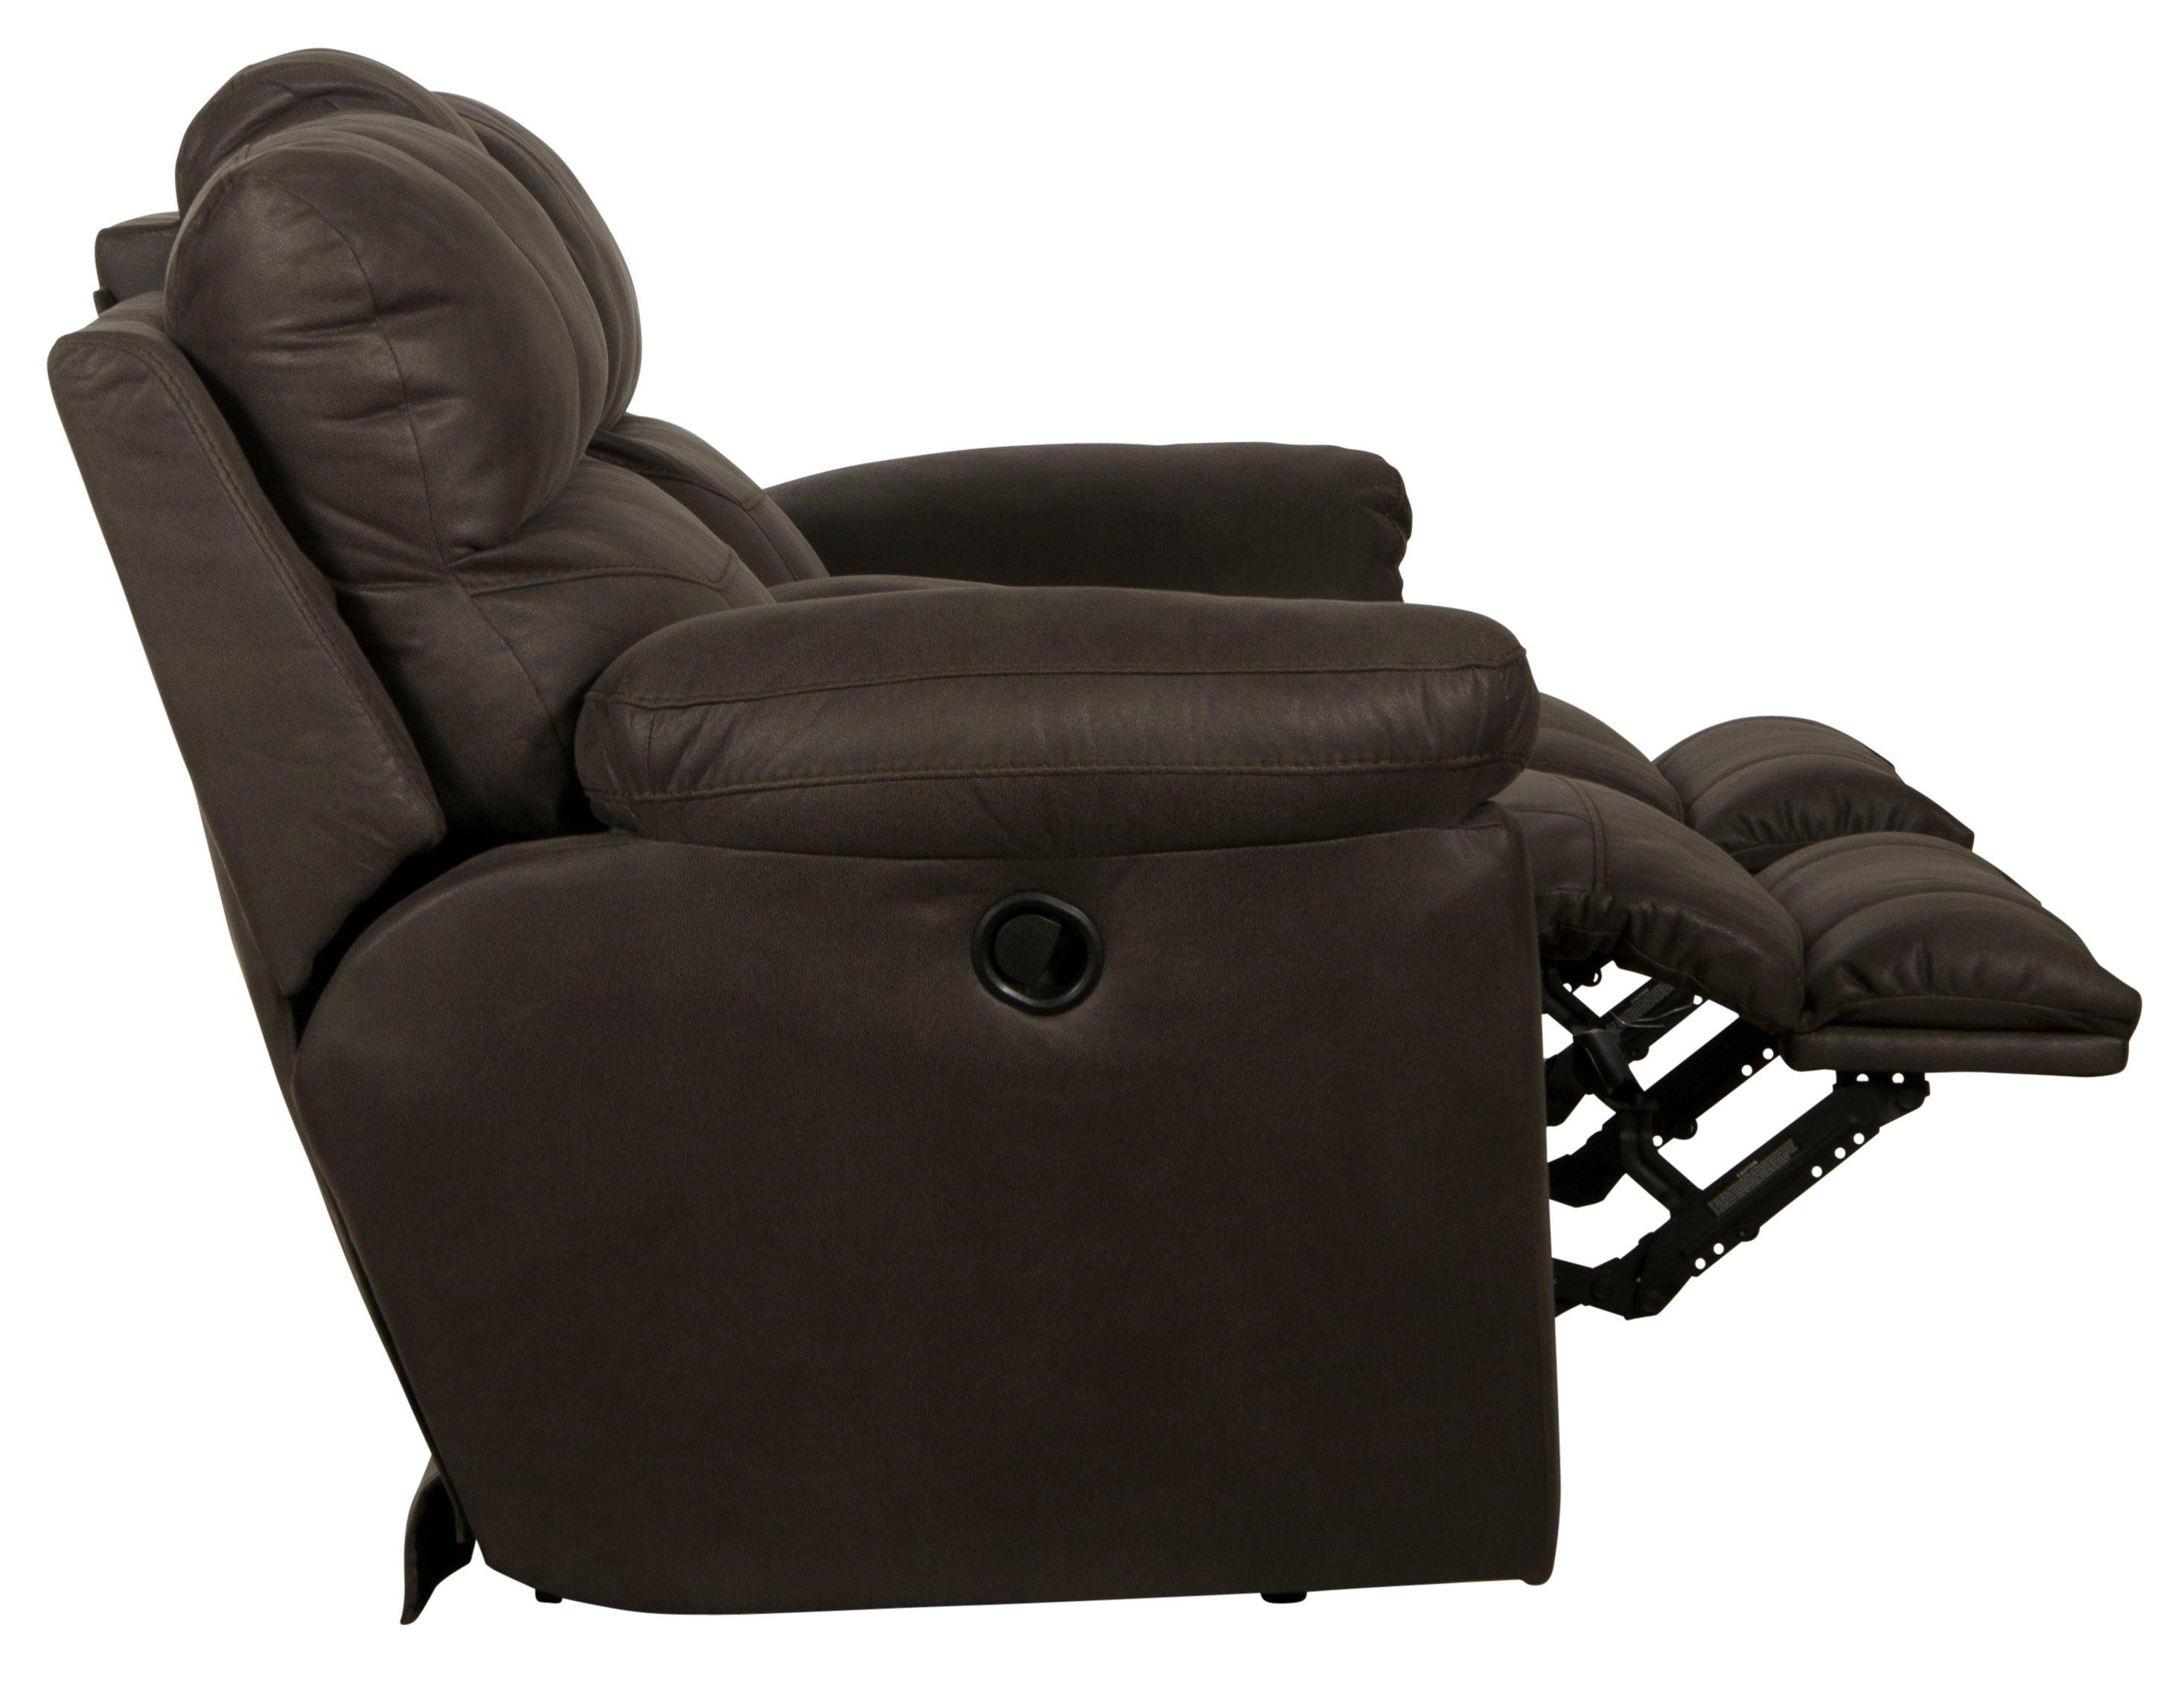 Catnapper - Atlas - Recliner Console Loveseat With Storage - Charcoal - 5th Avenue Furniture